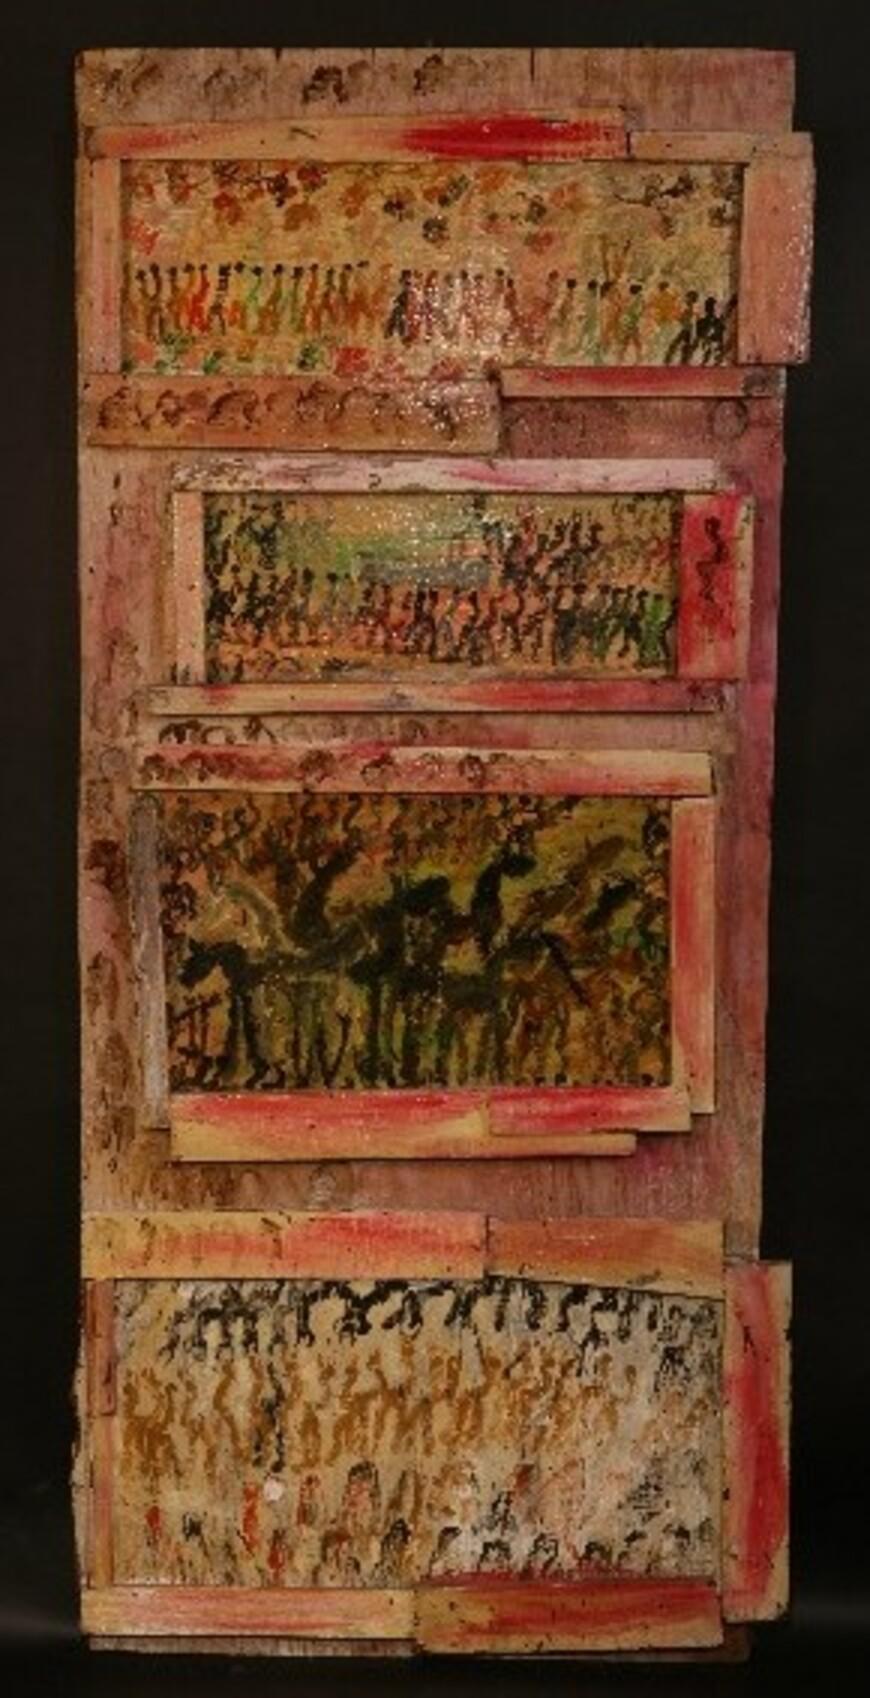  Collage 1989 - Painting by Purvis Young